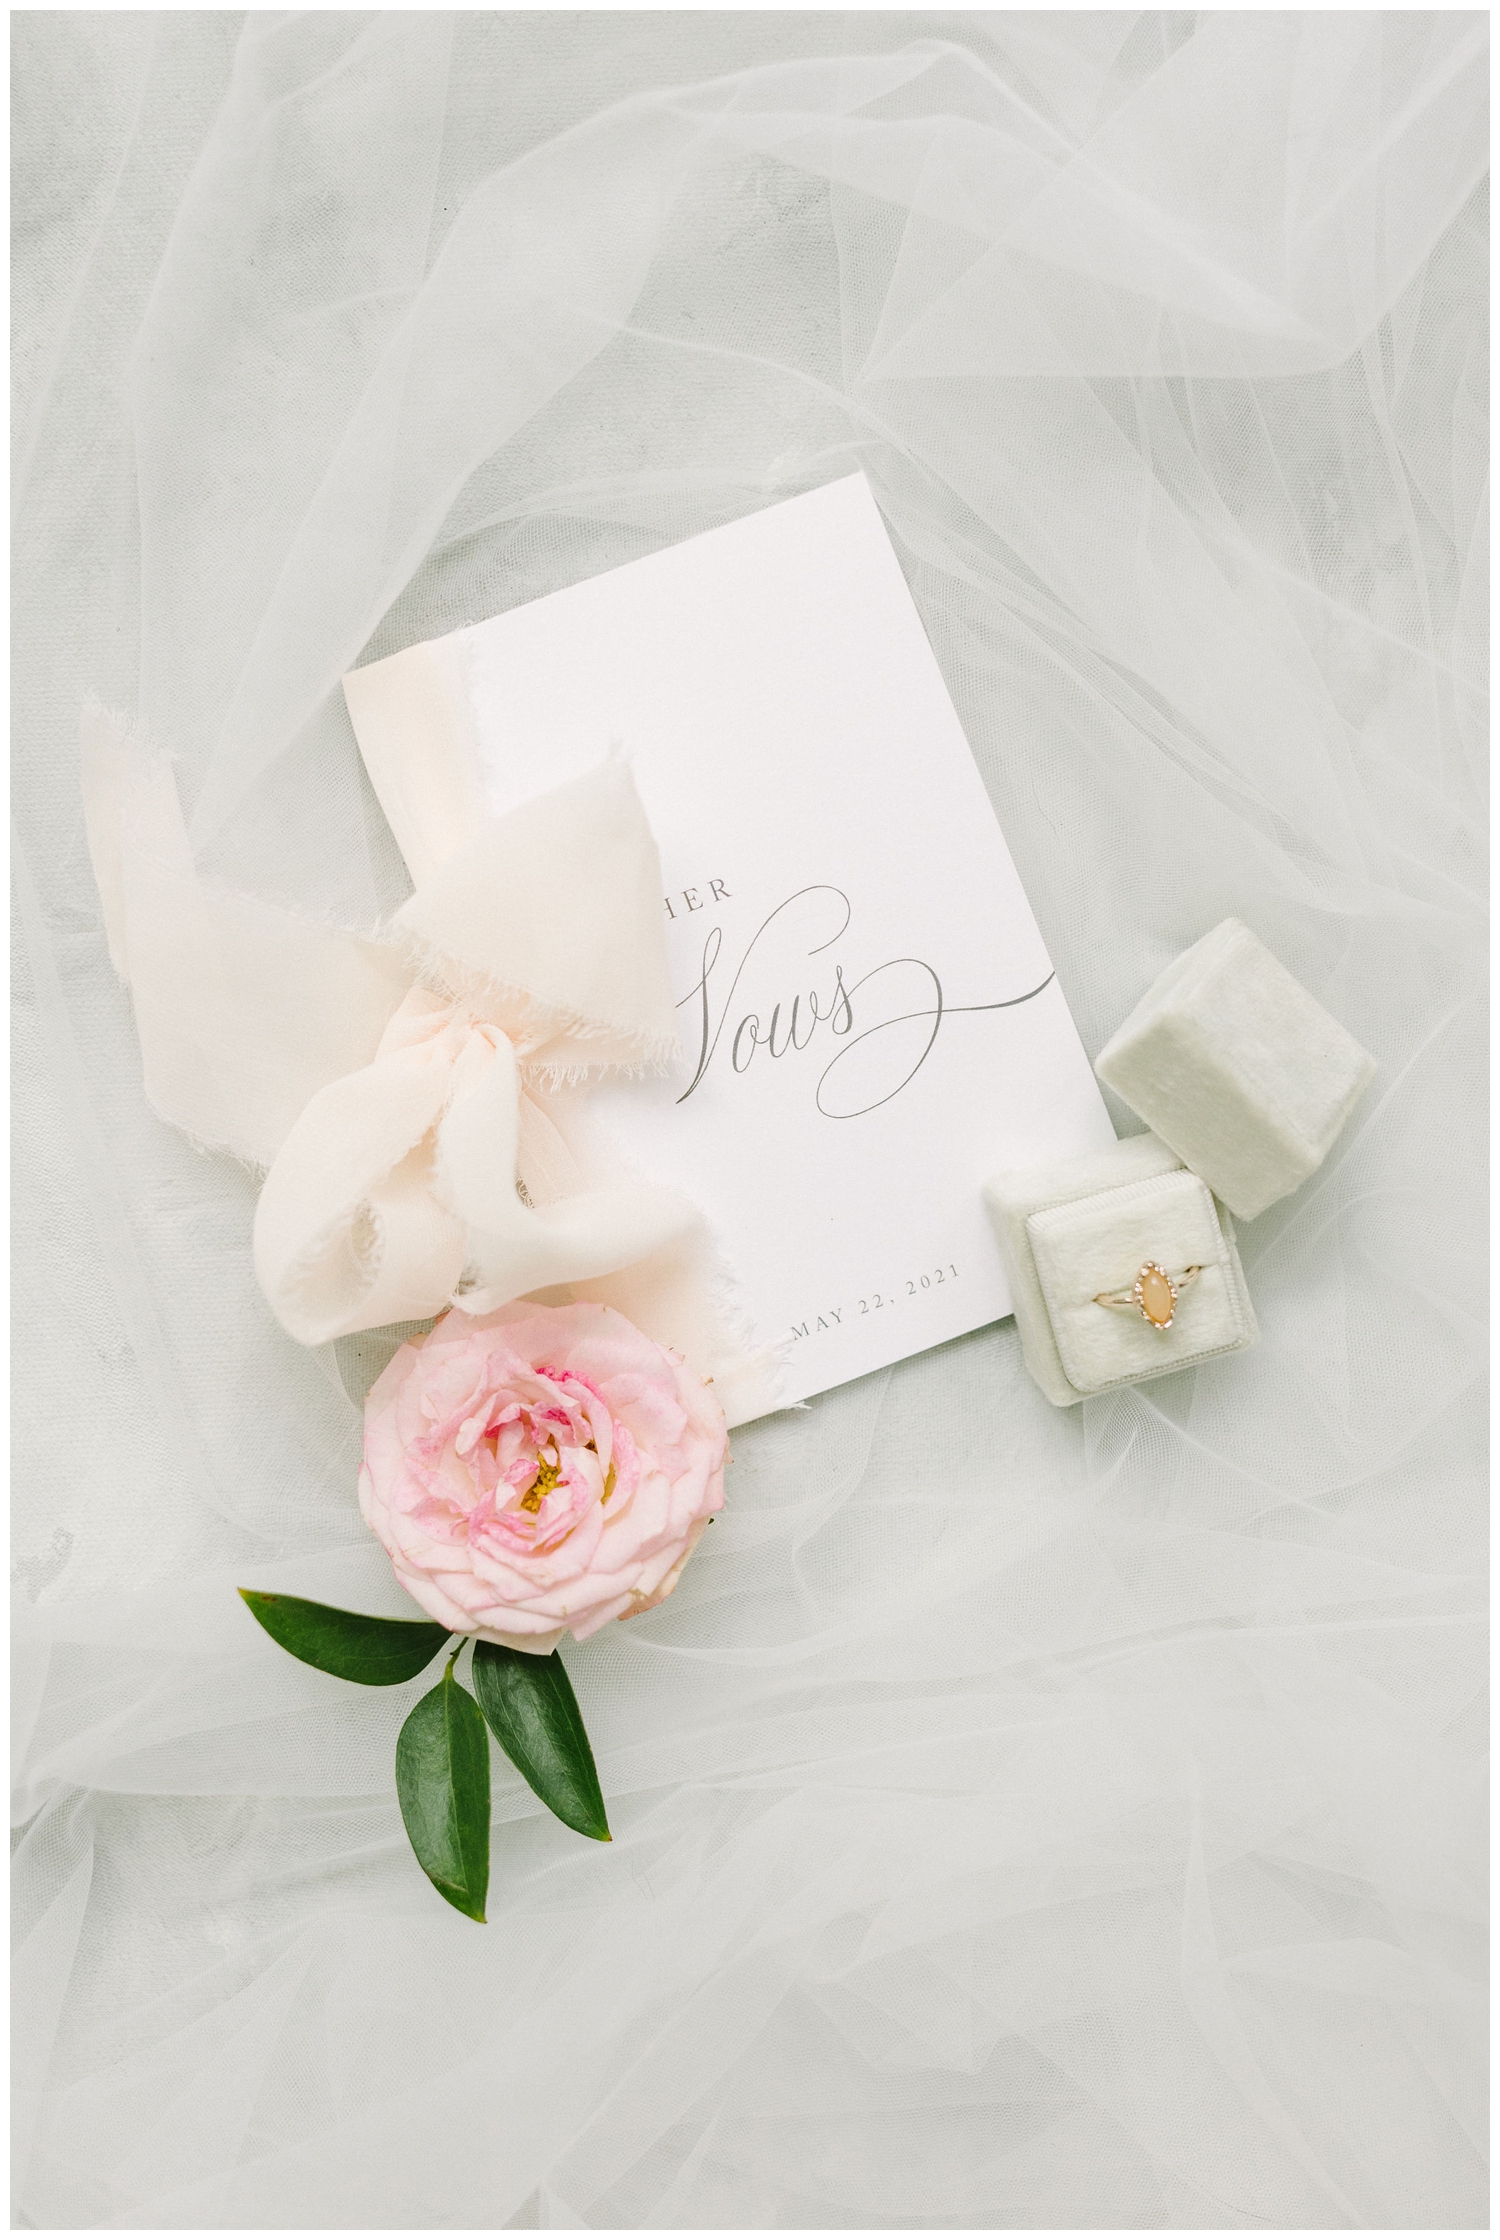 white vow books with peach wedding ring together as wedding flatlay